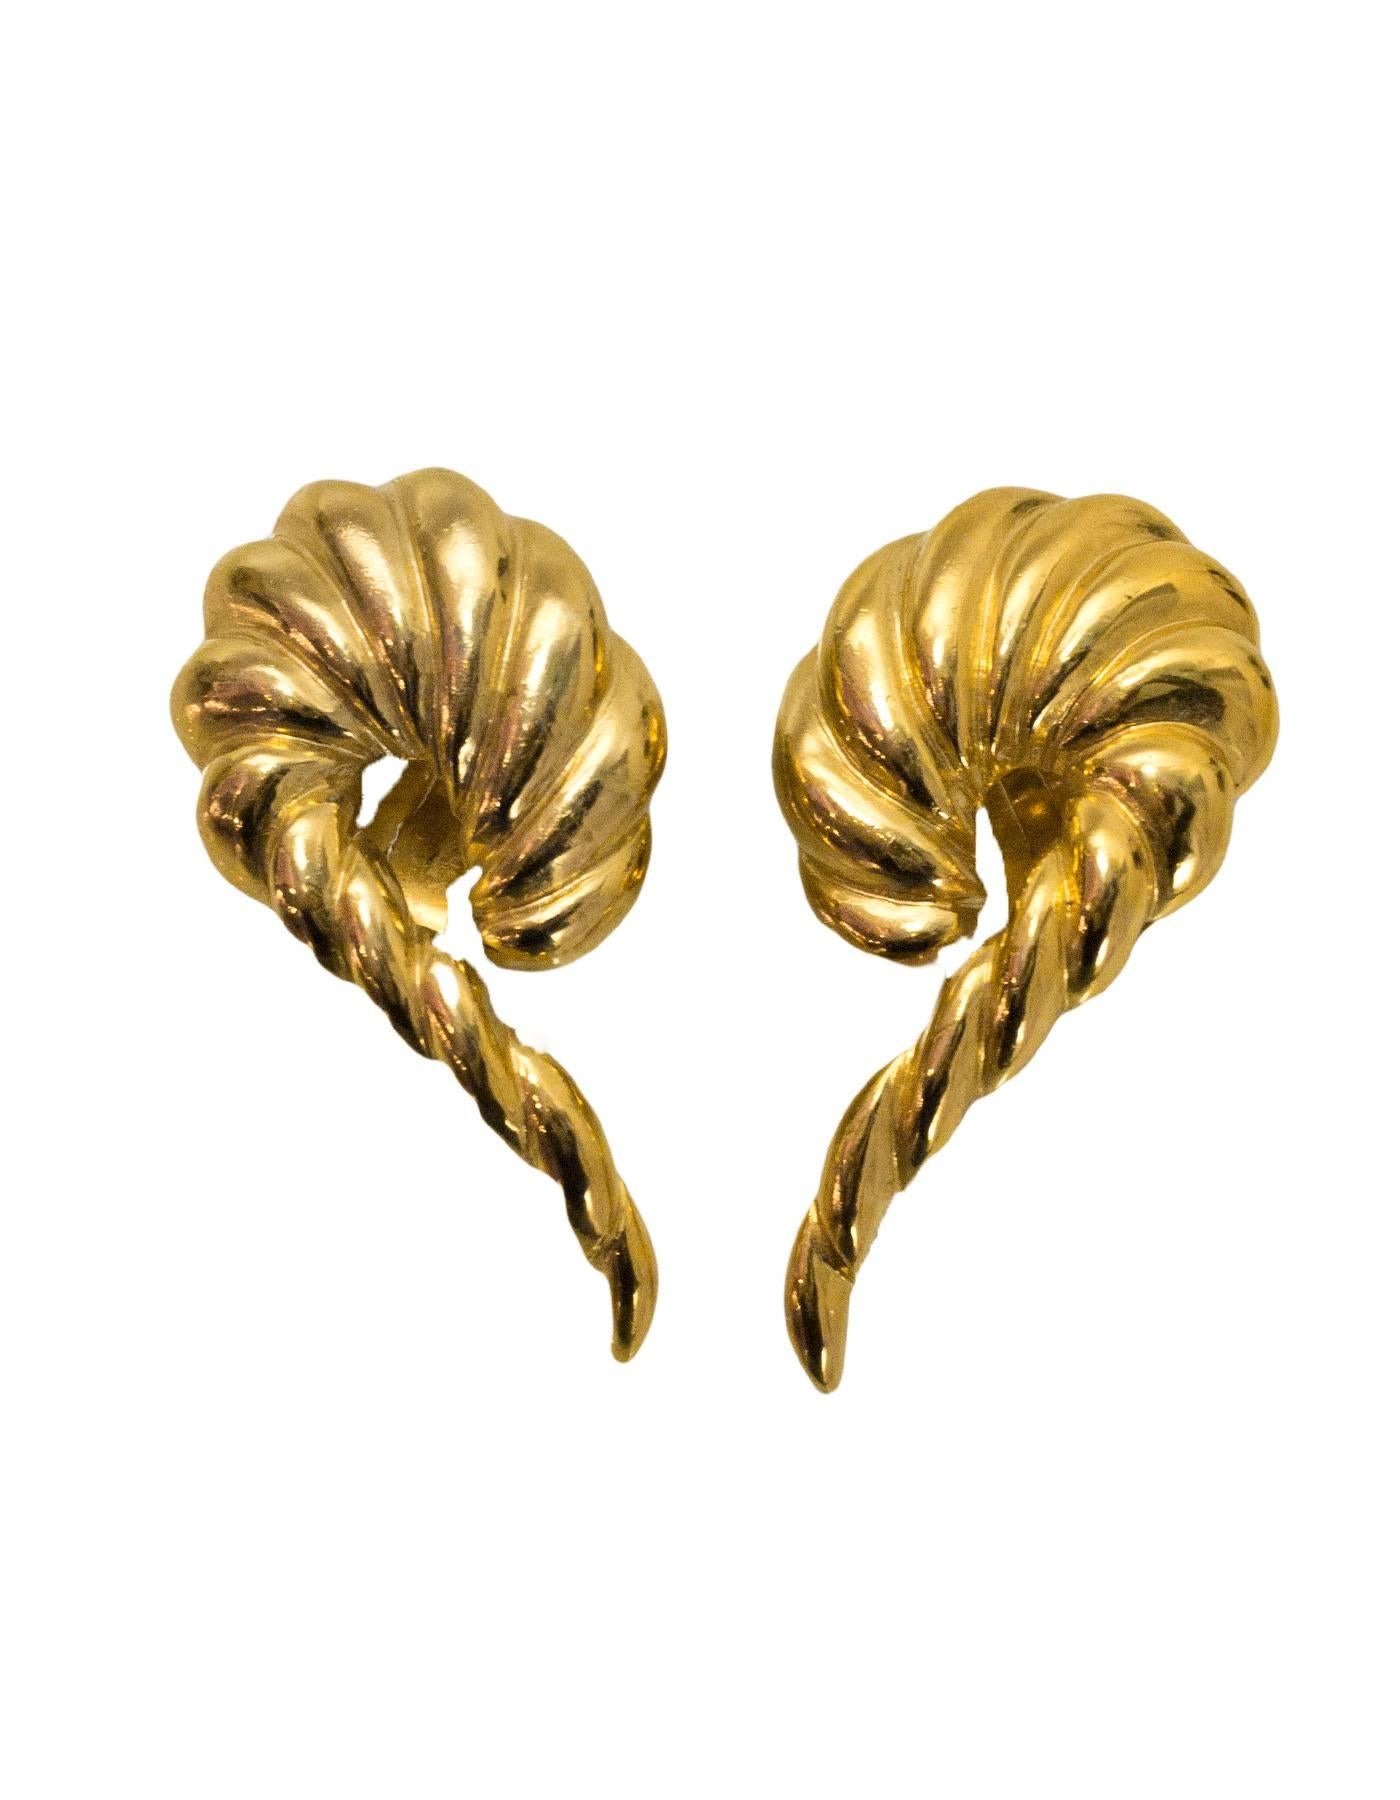 Valentino Goldtone Twisted Clip-On Earrings

Color: Goldtone
Materials: Metal
Closure: Clip-On
Overall Condition: Excellent pre-owned condition with light surface marks and tarnish

Measurements:
Length: 2